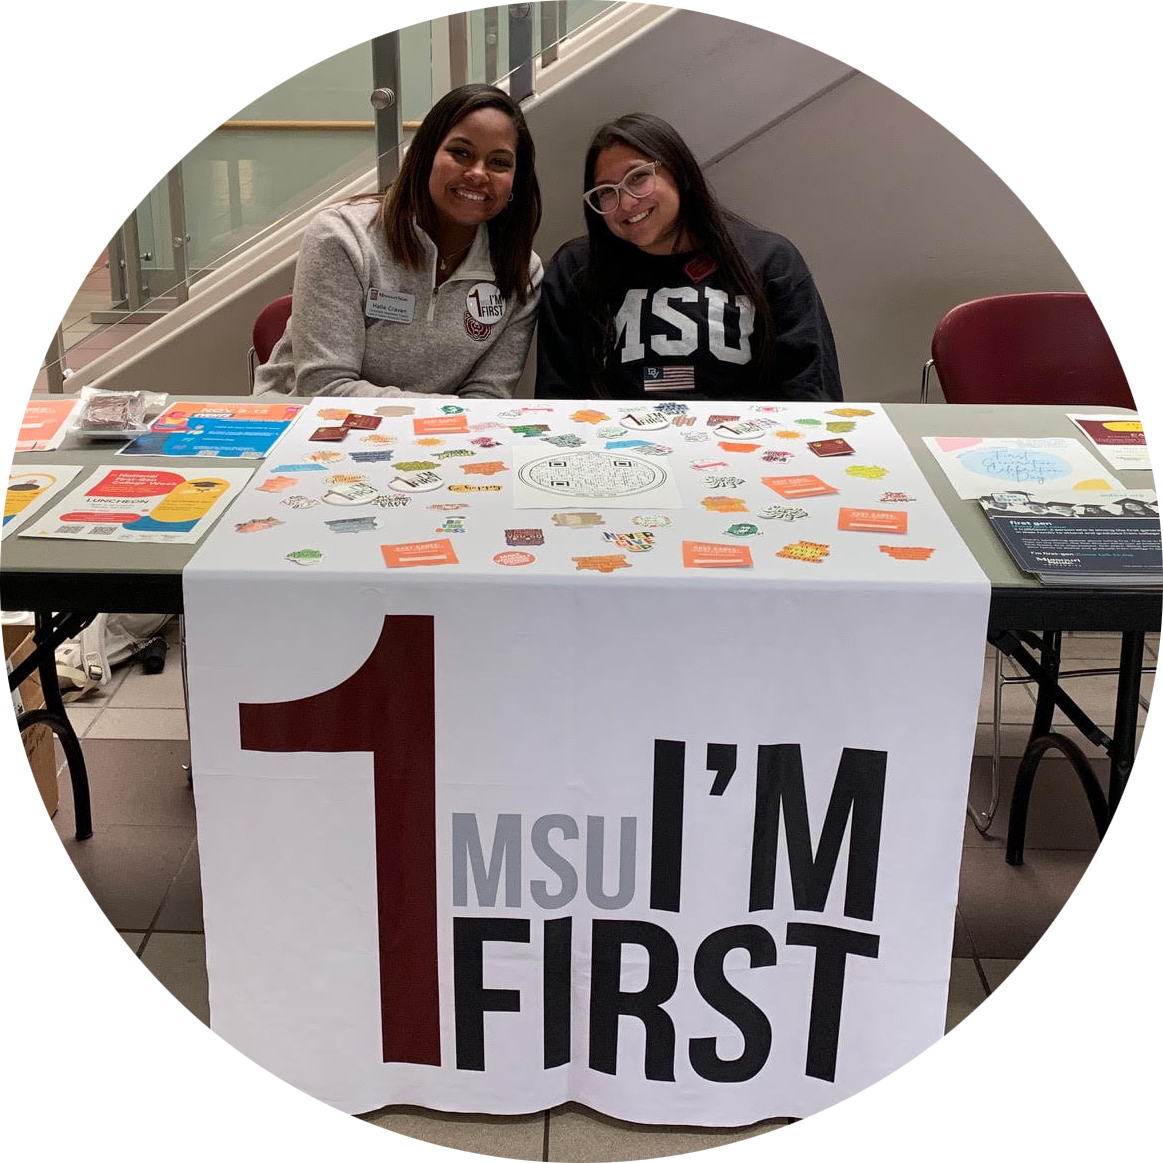 Two students smile into the camera. They are sitting behind a table with various materials on it and a banner that says 1 MSU I'm First